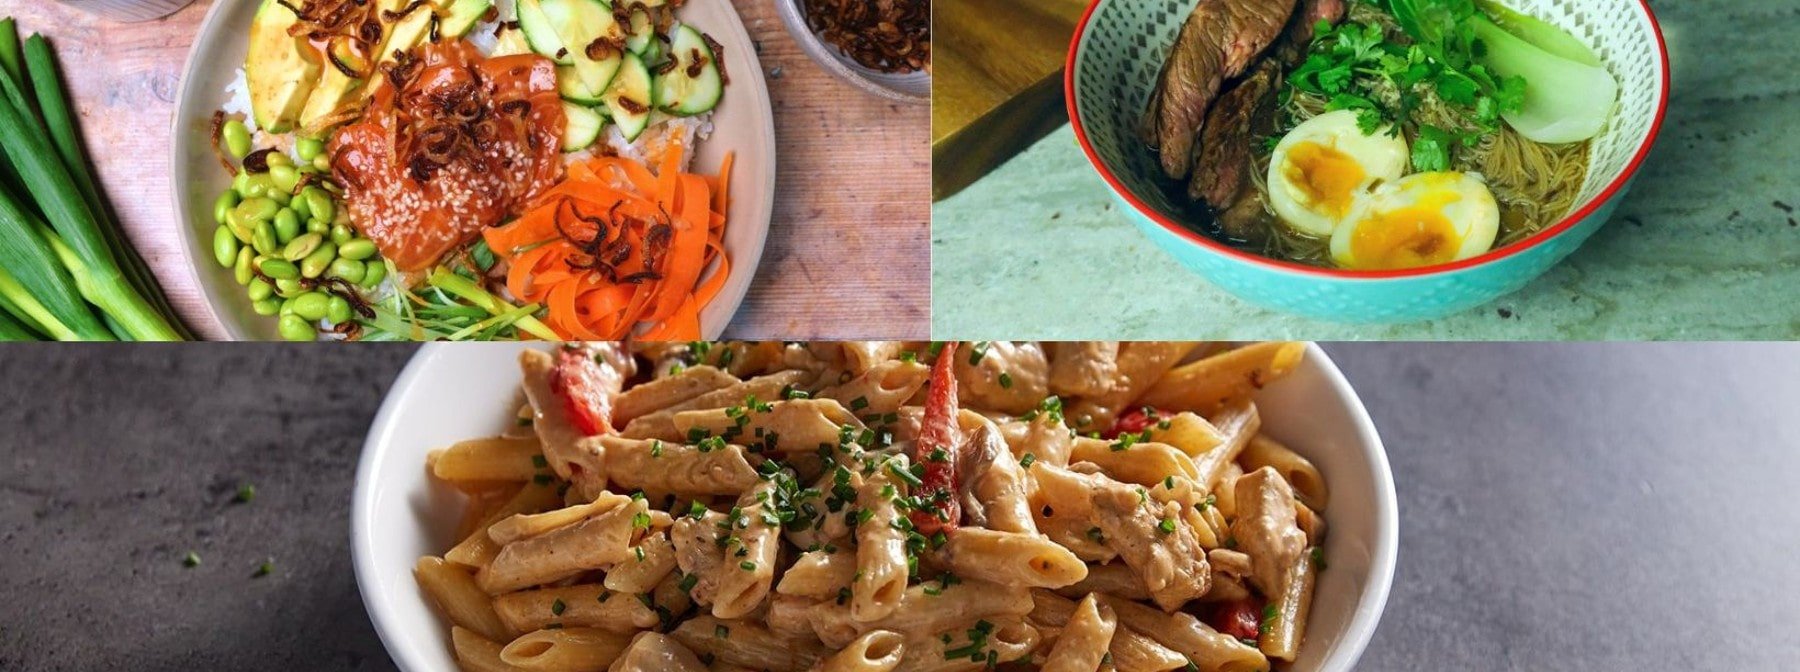 6 High Protein Dinner Recipes to Meet Your Macros 